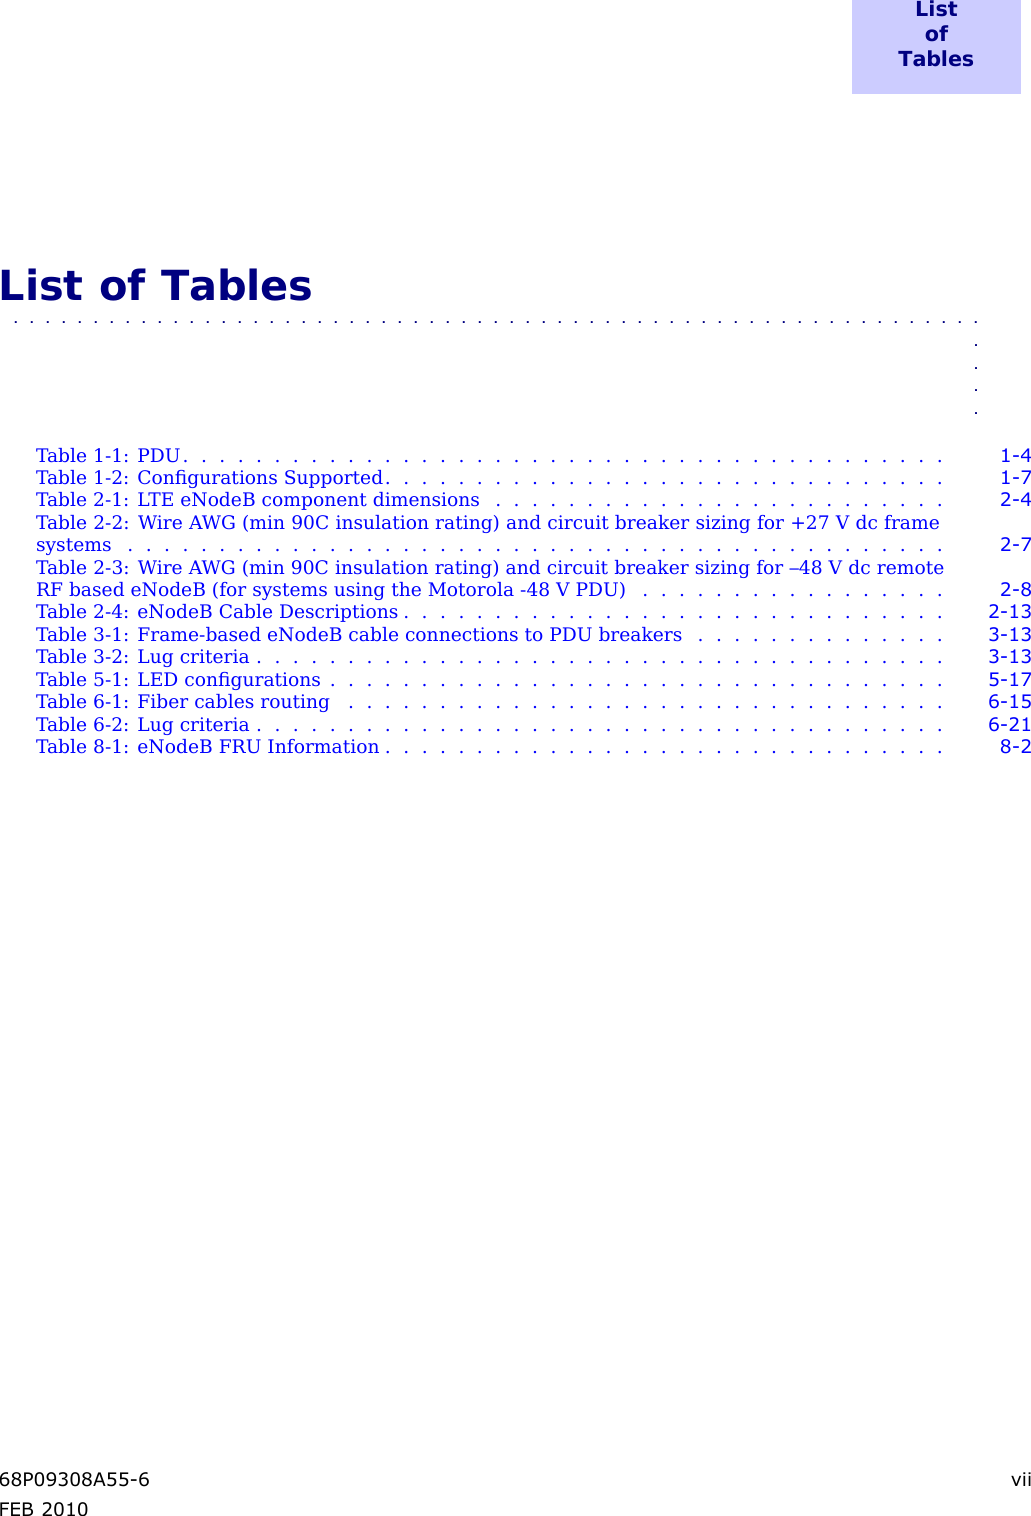 ListofTablesListofTables■■■■■■■■■■■■■■■■■■■■■■■■■■■■■■■■■■■■■■■■■■■■■■■■■■■■■■■■■■■■■■■■■Table1-1:PDU..........................................1-4Table1-2:CongurationsSupported...............................1-7Table2-1:LTEeNodeBcomponentdimensions.........................2-4Table2-2:WireAWG(min90Cinsulationrating)andcircuitbreakersizingfor+27Vdcframesystems.............................................2-7Table2-3:WireAWG(min90Cinsulationrating)andcircuitbreakersizingfor–48VdcremoteRFbasedeNodeB(forsystemsusingtheMotorola-48VPDU).................2-8Table2-4:eNodeBCableDescriptions..............................2-13Table3-1:Frame-basedeNodeBcableconnectionstoPDUbreakers..............3-13Table3-2:Lugcriteria......................................3-13Table5-1:LEDcongurations..................................5-17Table6-1:Fibercablesrouting.................................6-15Table6-2:Lugcriteria......................................6-21Table8-1:eNodeBFRUInformation...............................8-268P09308A55-6viiFEB2010